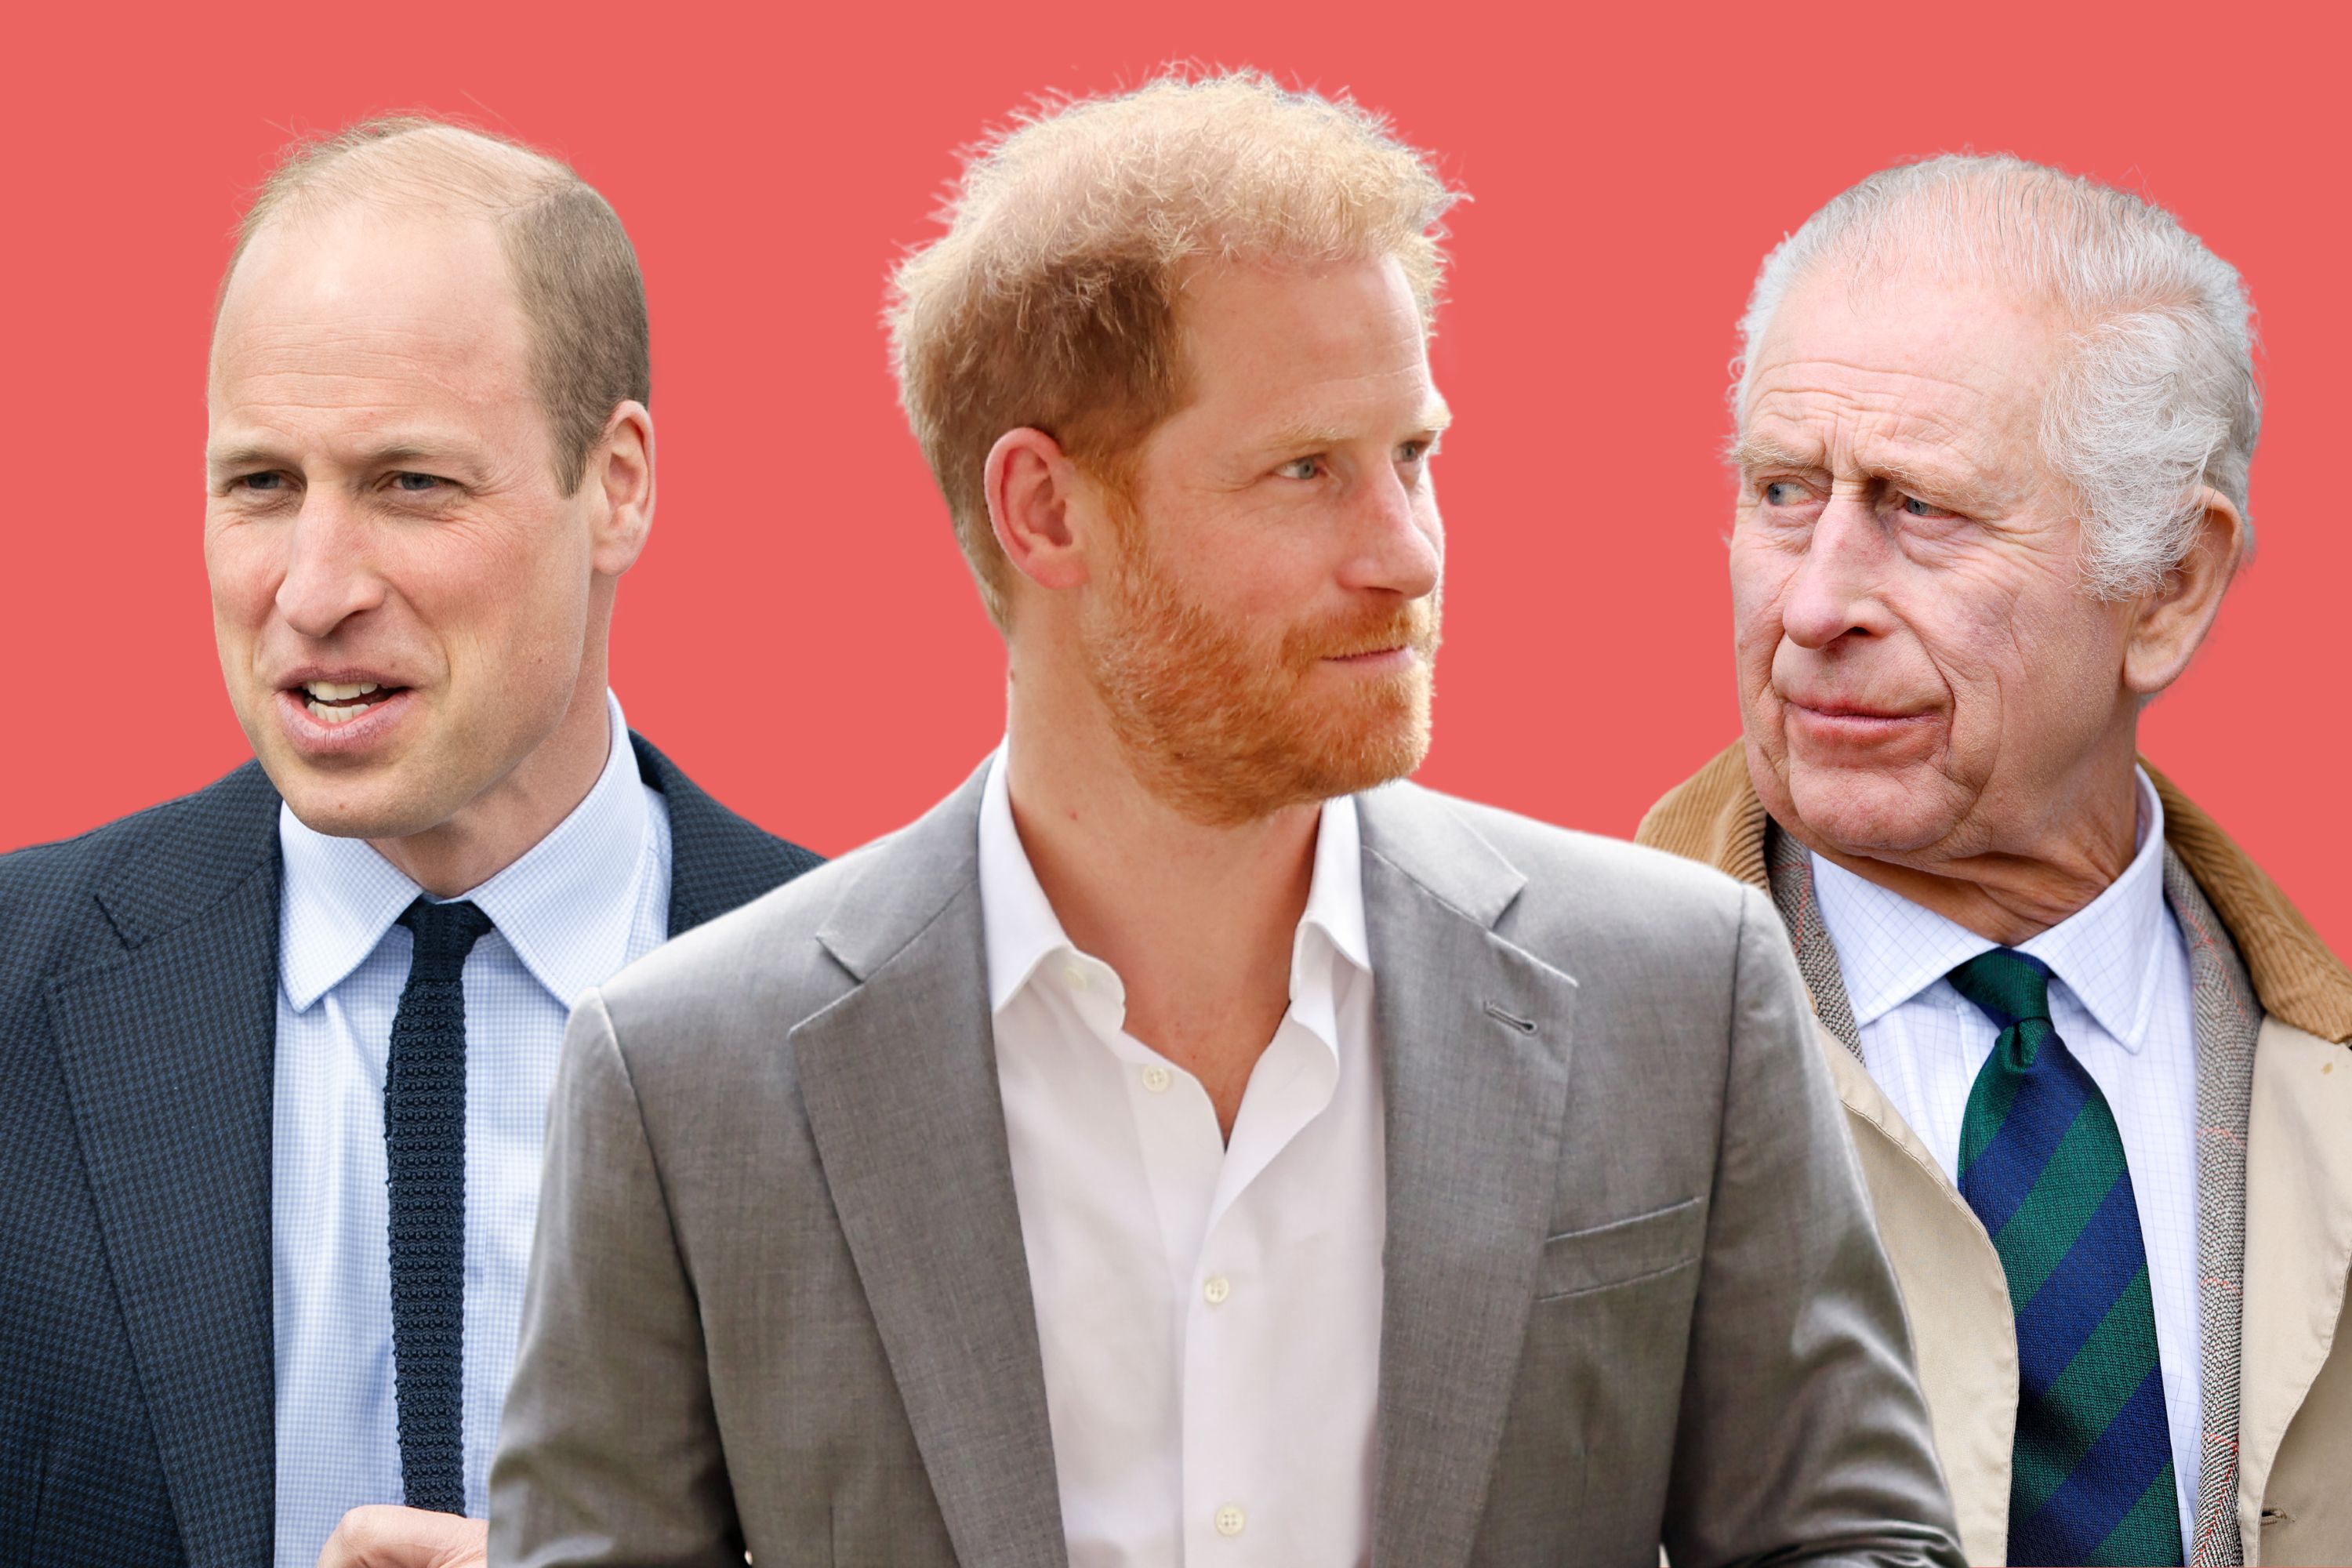 King Charles’ disdain for Prince Harry could be a costly mistake